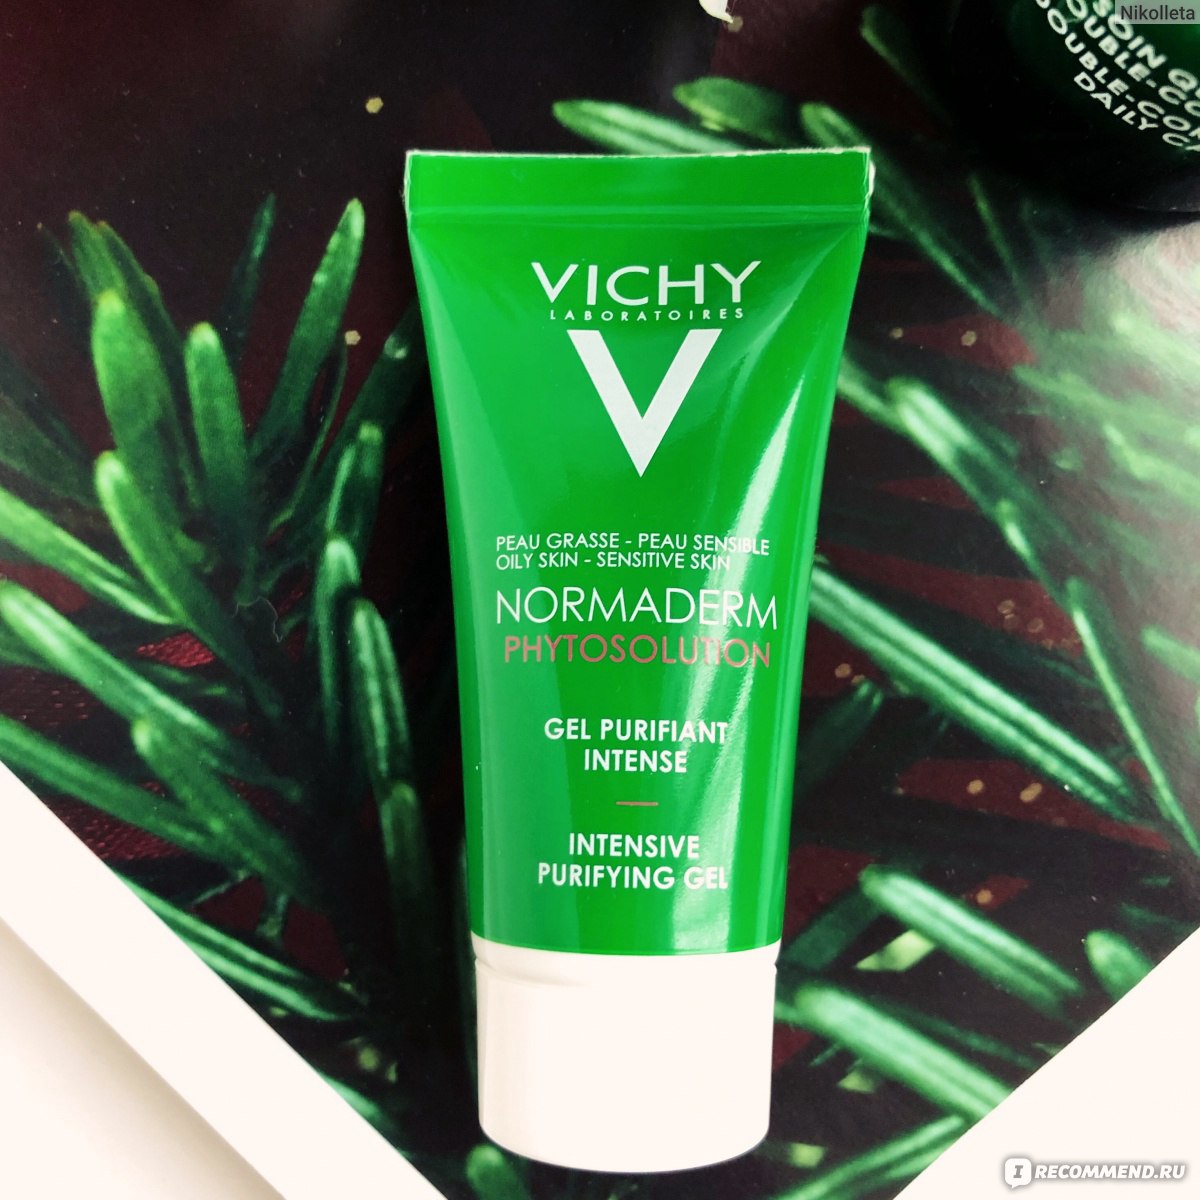 Vichy normaderm phytosolution intensive purifying gel. Виши умывалка Normaderm. Normaderm Vichy 3 мл. Виши Нормадерм интенсив Purifying. Vichy Normaderm phytosolution Gel.